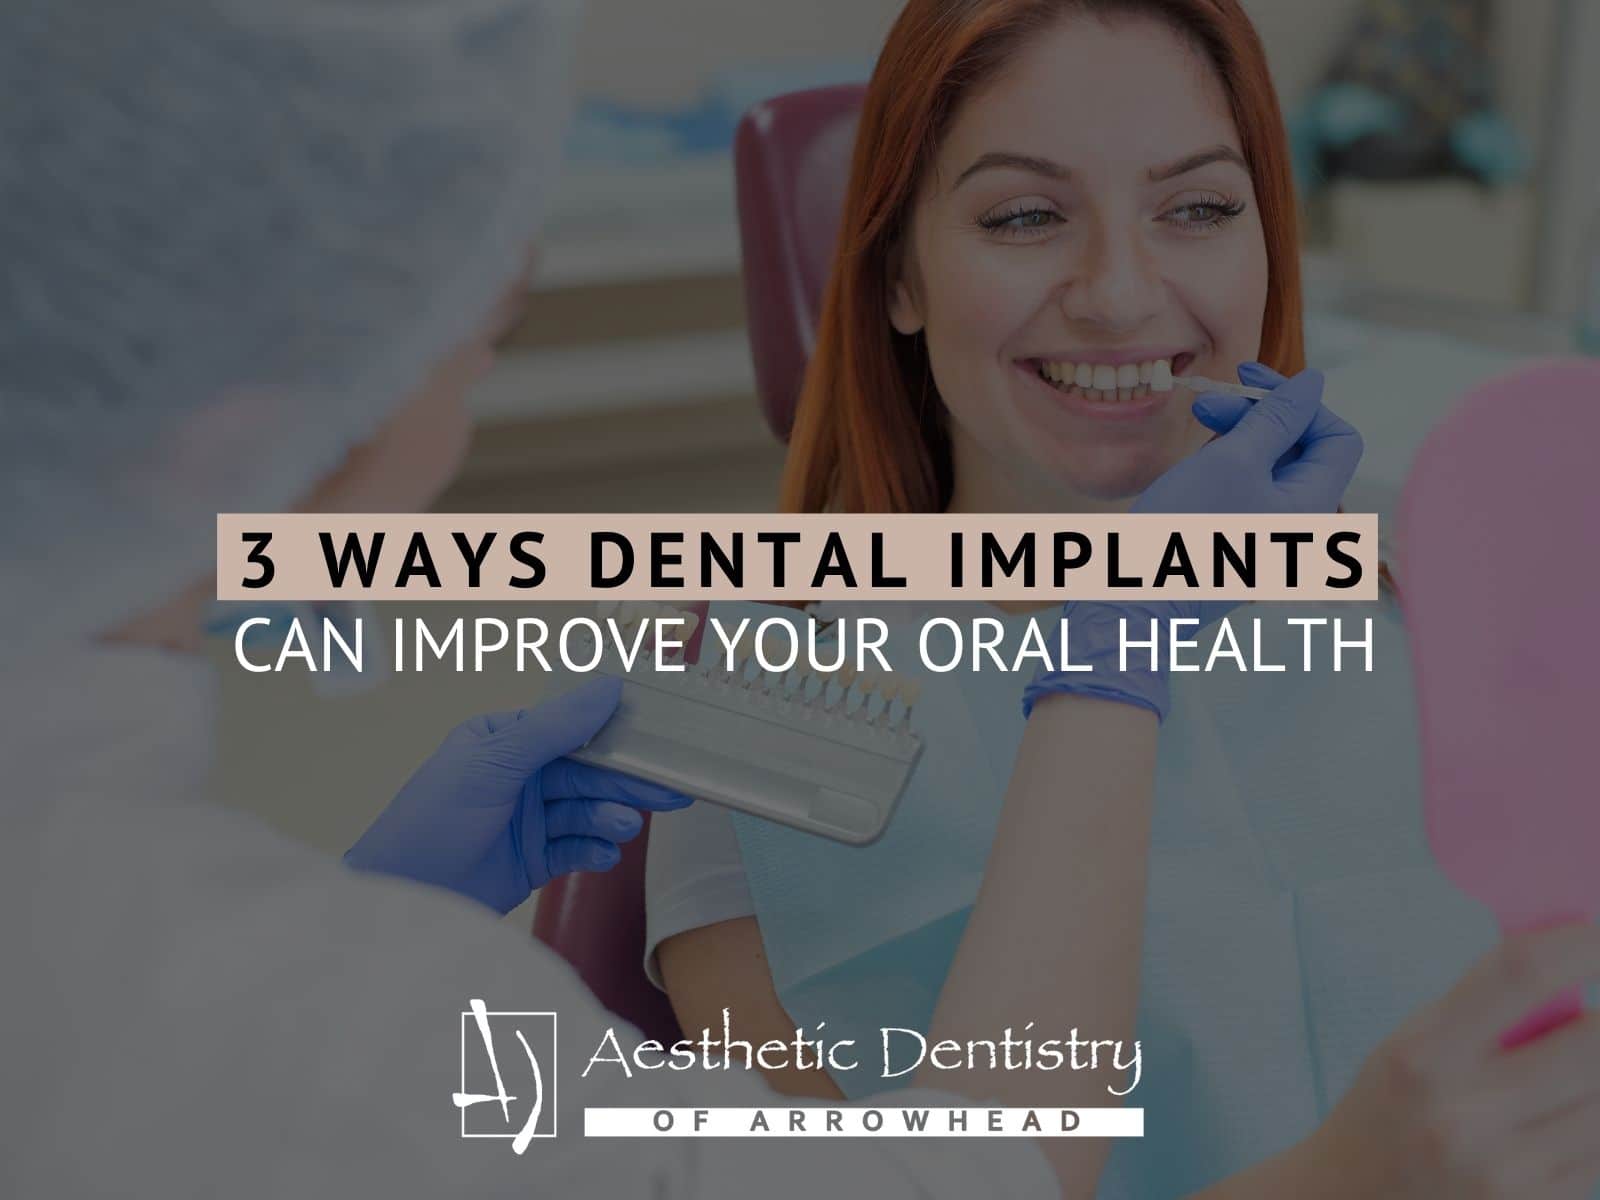 3 Ways Dental Implants Can Improve Your Oral Health